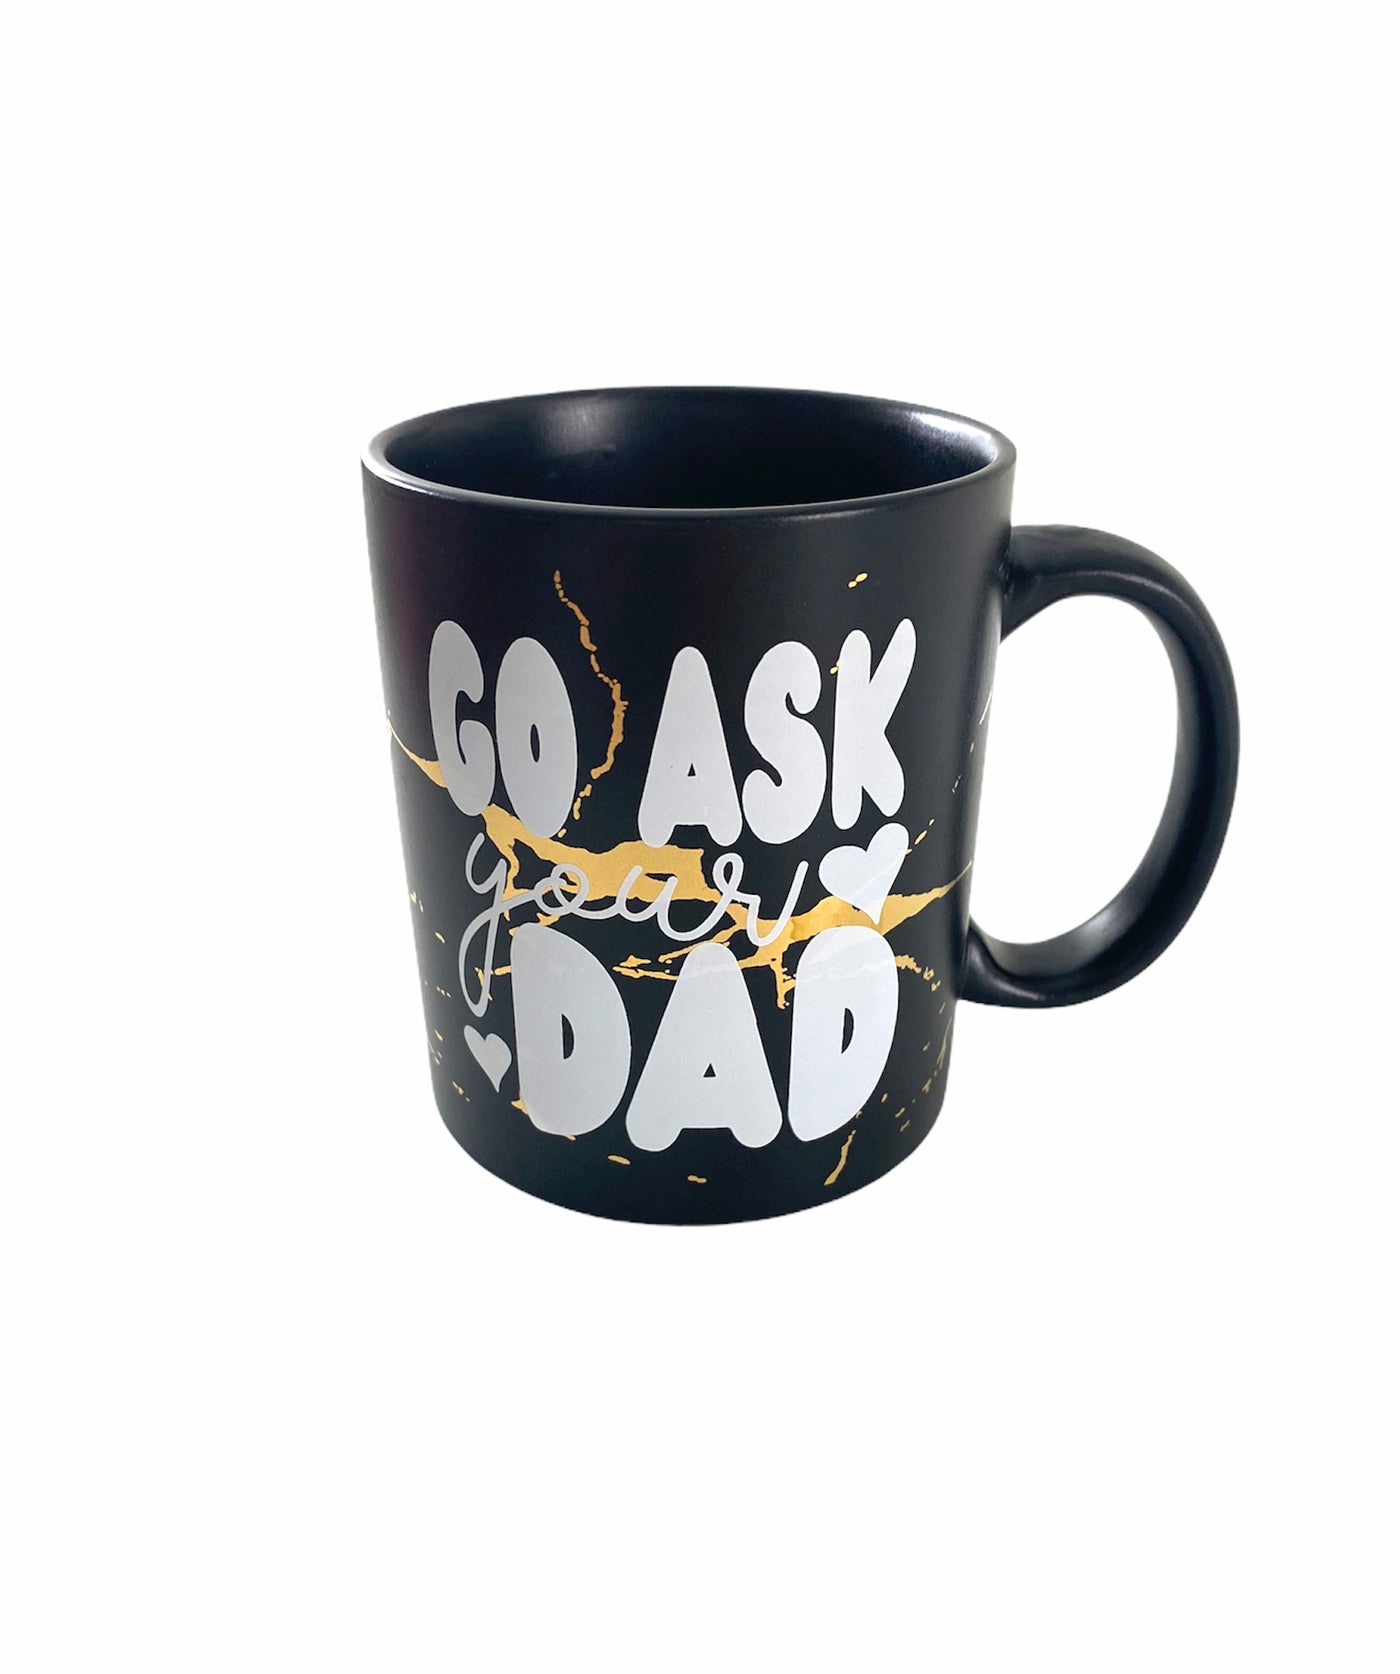 A black coffee mug with gold veins. On the coffee mug there are the words "Go Ask" in bubble letter then the word "your" in cursive under that and on the bottom says "dad" in bubble font.